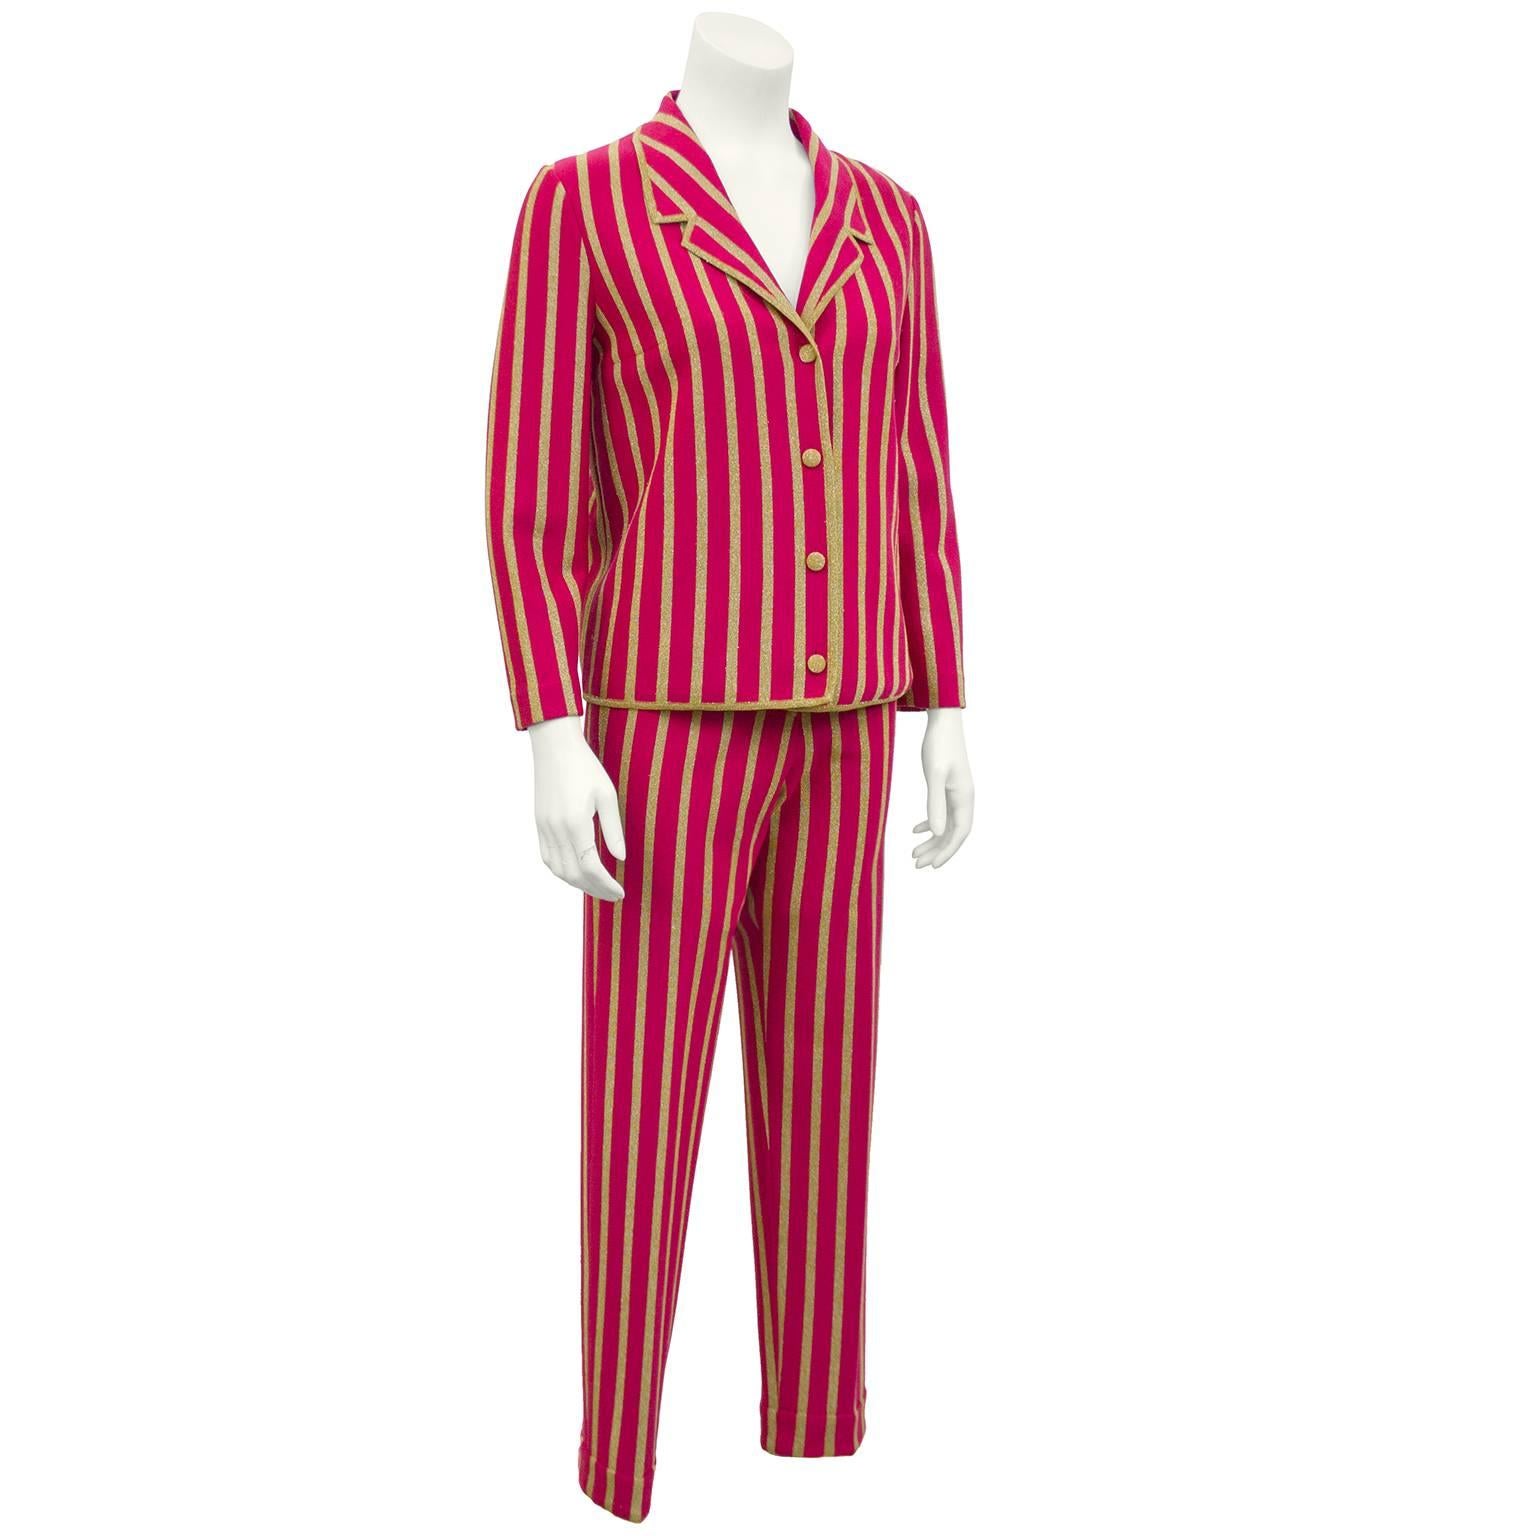 1960s raspberry and gold lurex vertical stripe 3 piece wool knit suit by Italian knit wear designer Gino Paoli. Light jacket with matching gold lurex buttons. Pants have an elastic waist, front button and zipper fly, centre pleats and bottoms are